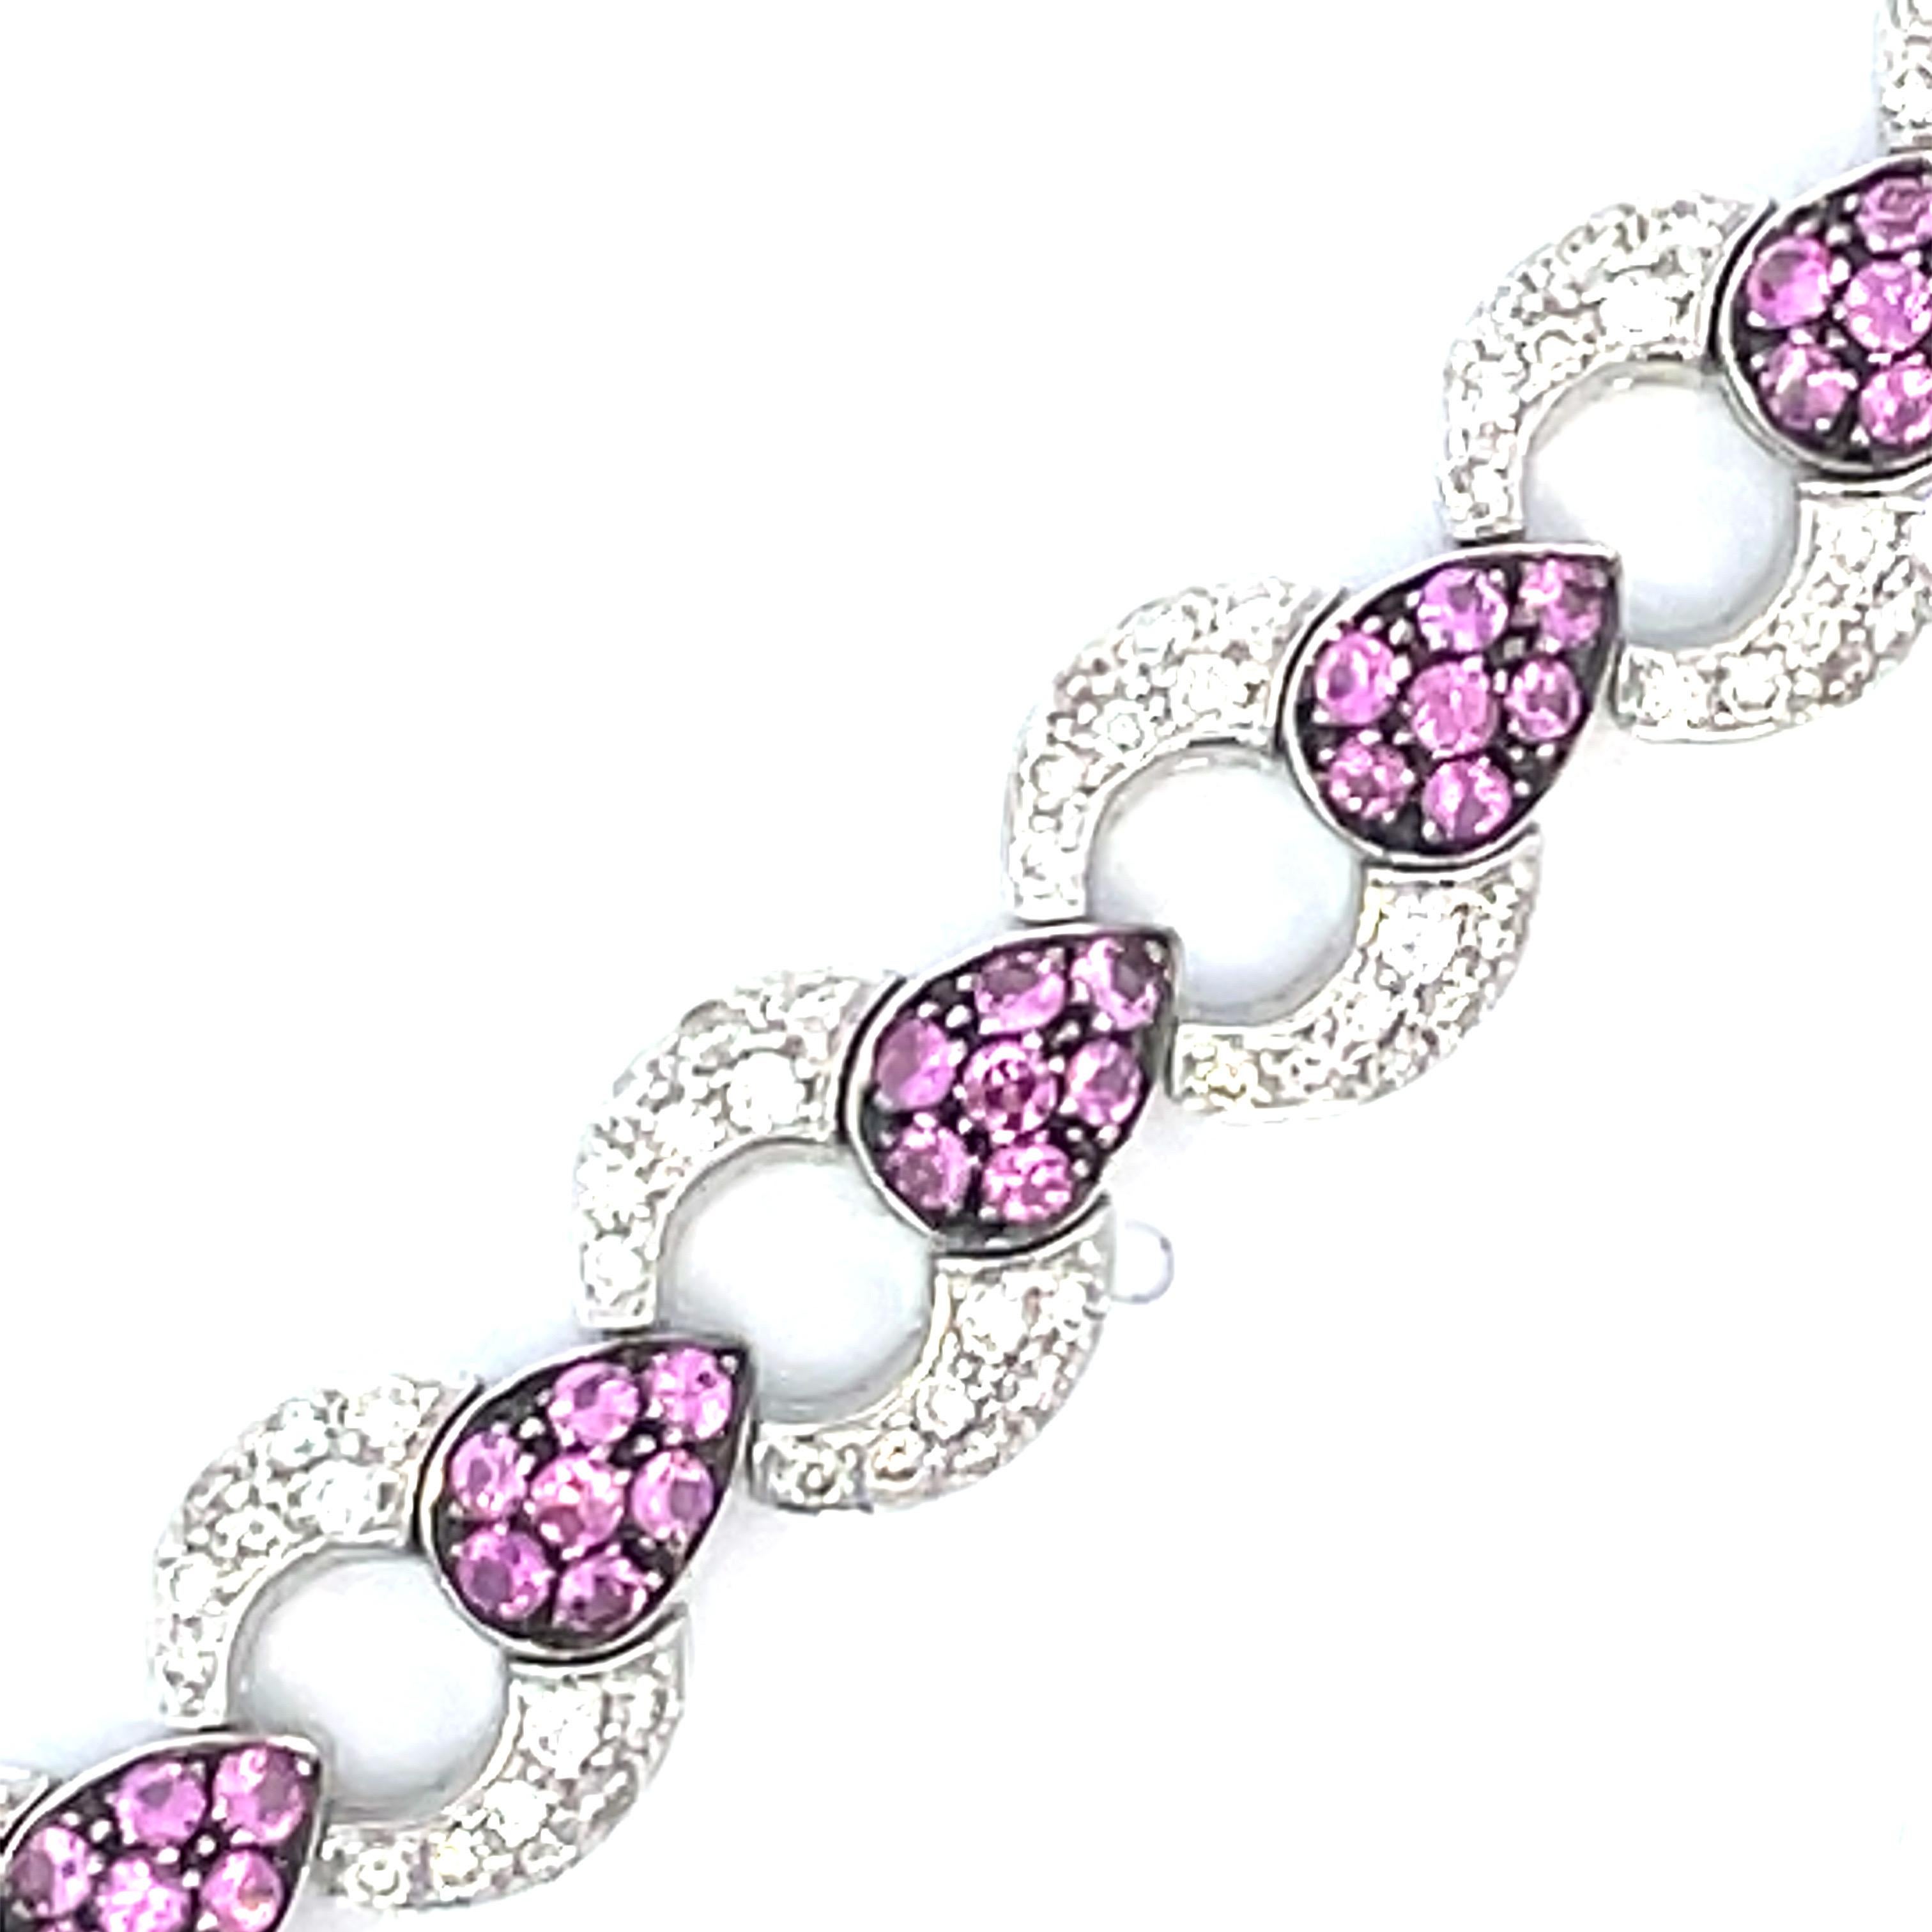 An elegant  pave link bracelet with alternating pave natural white diamond and  a black rhodium finish around the natural pink sapphire pear shape in 18kt white gold.

112 natural pink sapphires weighing 2.81ct total weight

224 natural diamonds